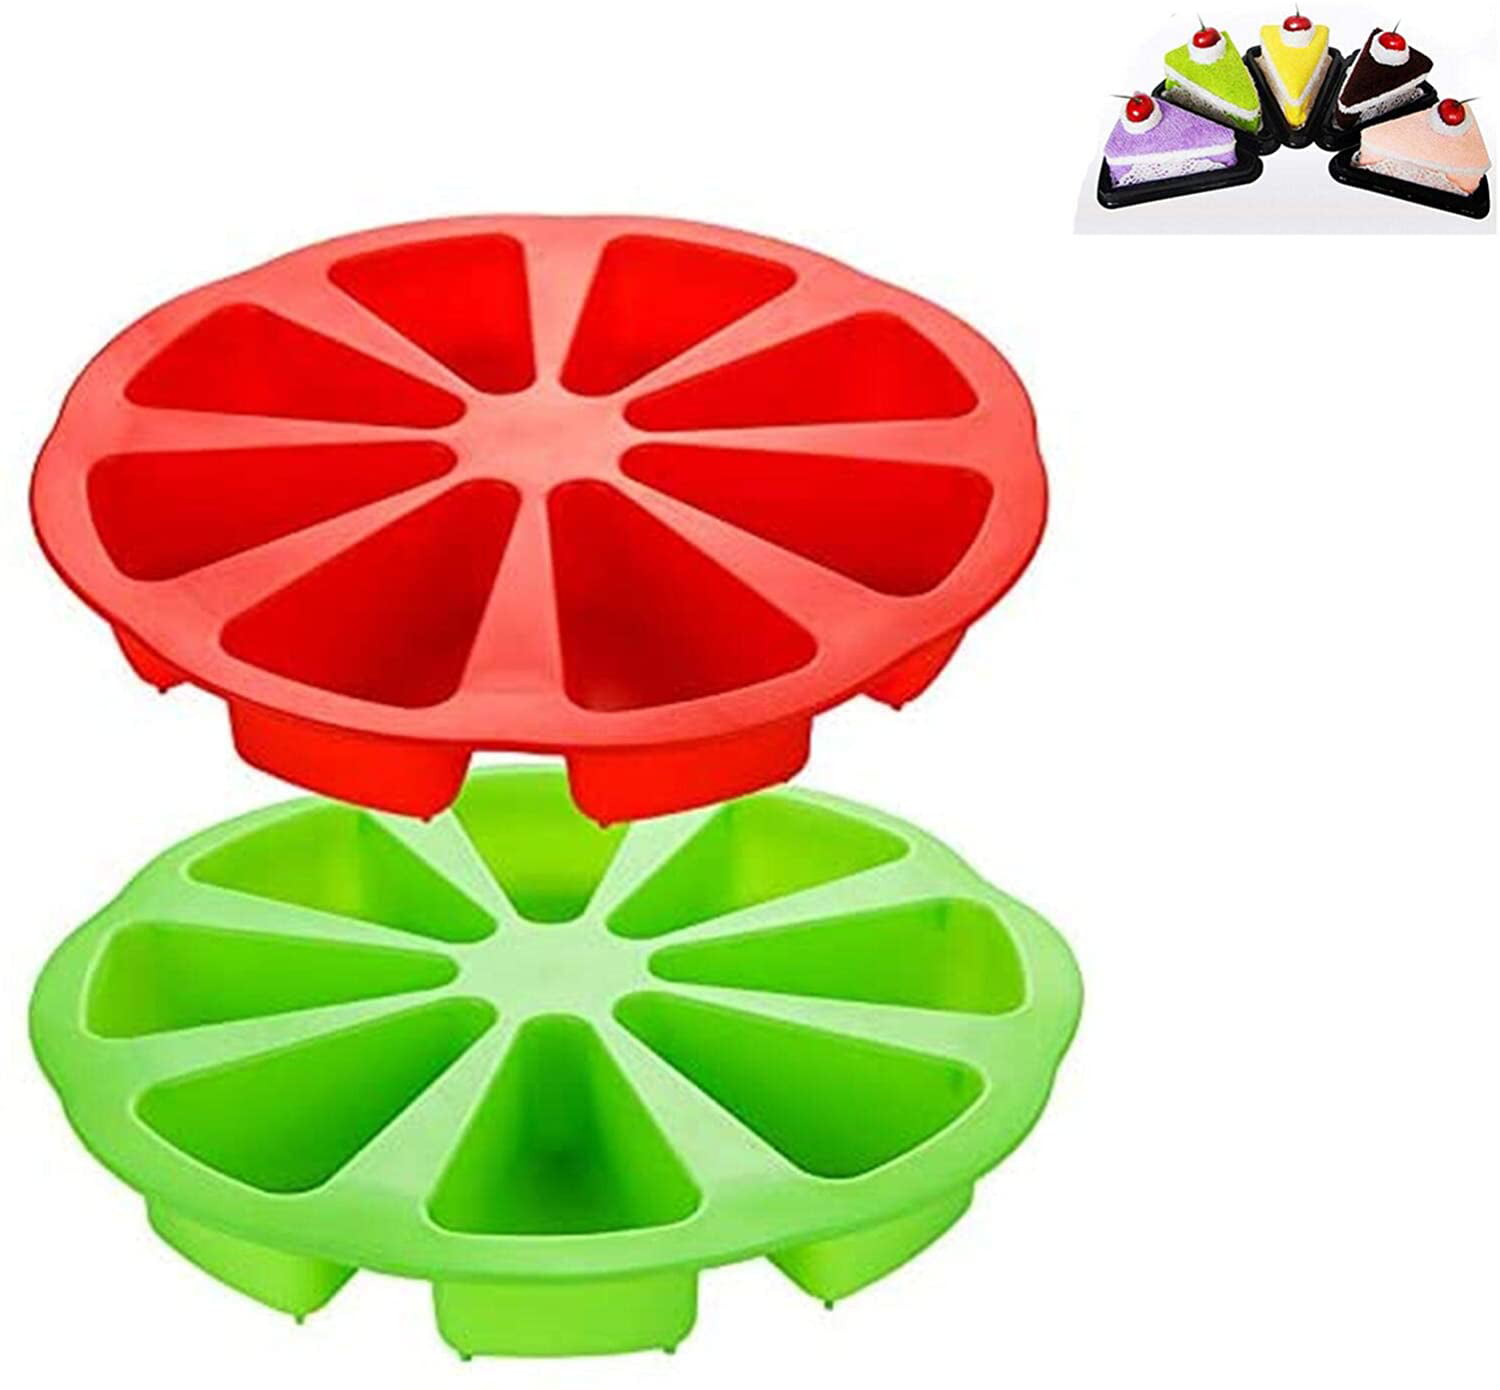 Round 8 Triangle Cavity Cake Pan Mold,Silicone Cake Mould,Triangle Cake Mould Individual Portion Cake Pan Mould Red&Green 